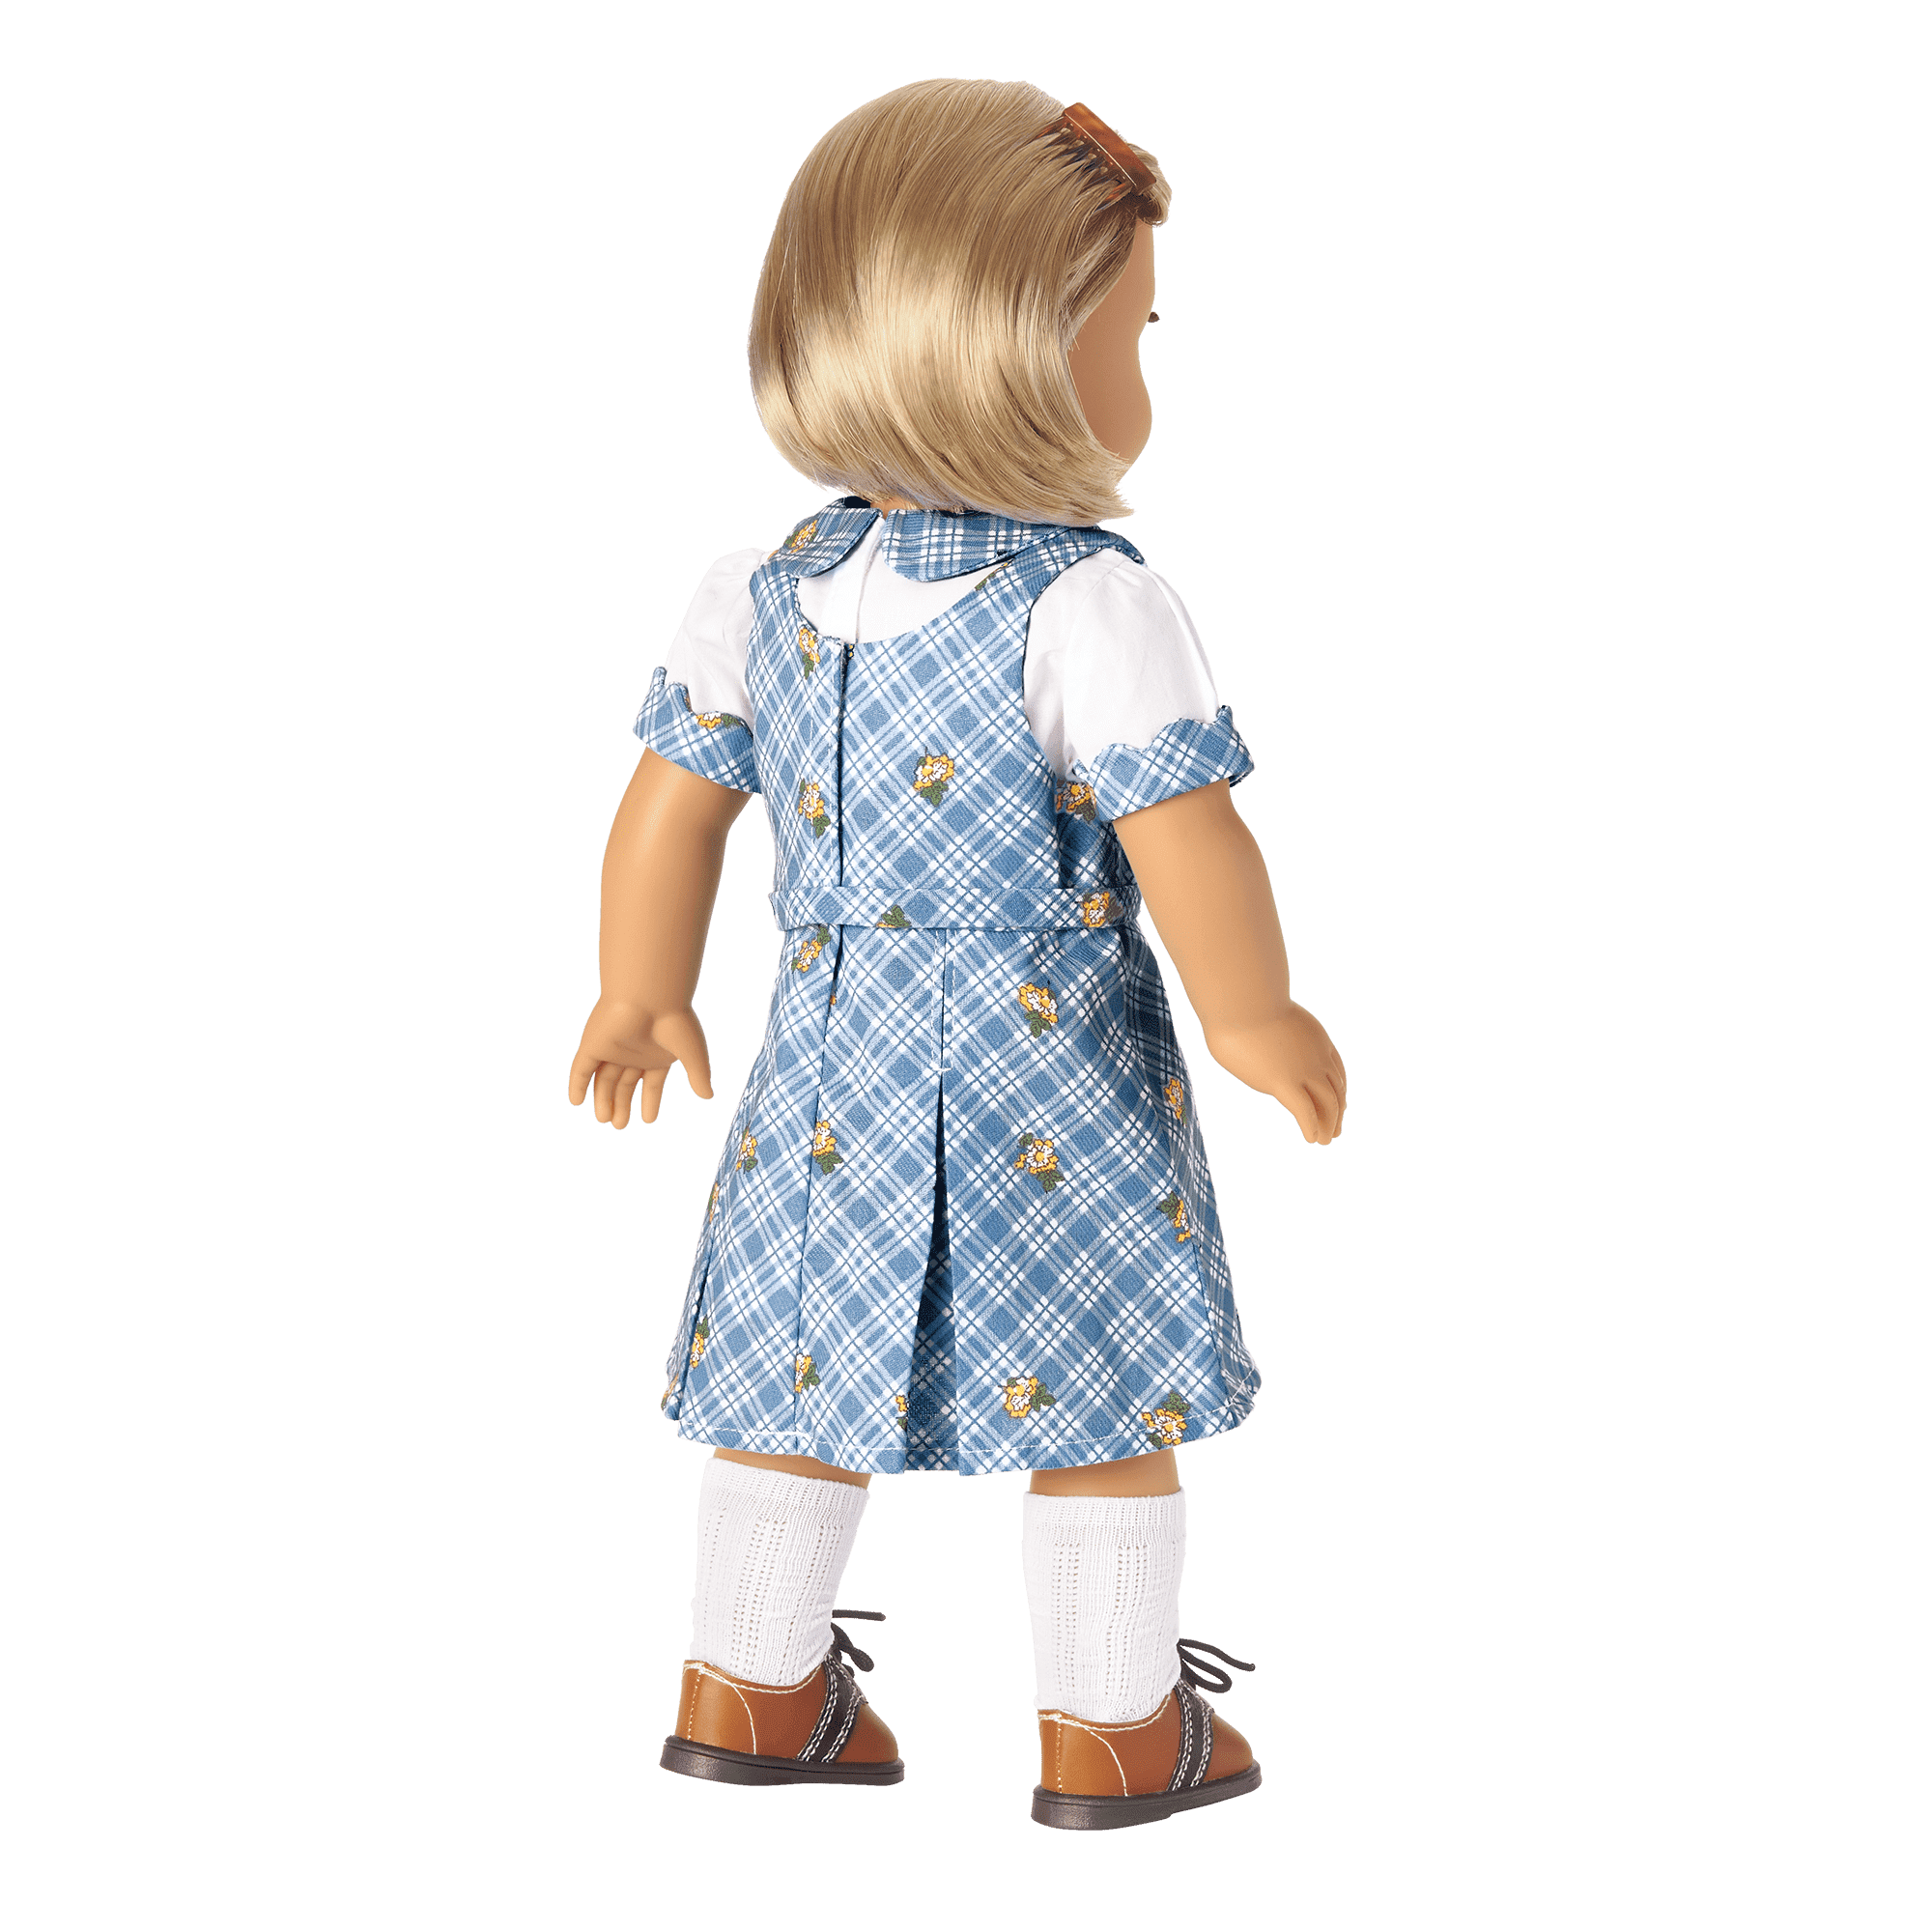 Kit’s™ School Outfit for 18-inch Dolls (Historical Characters)